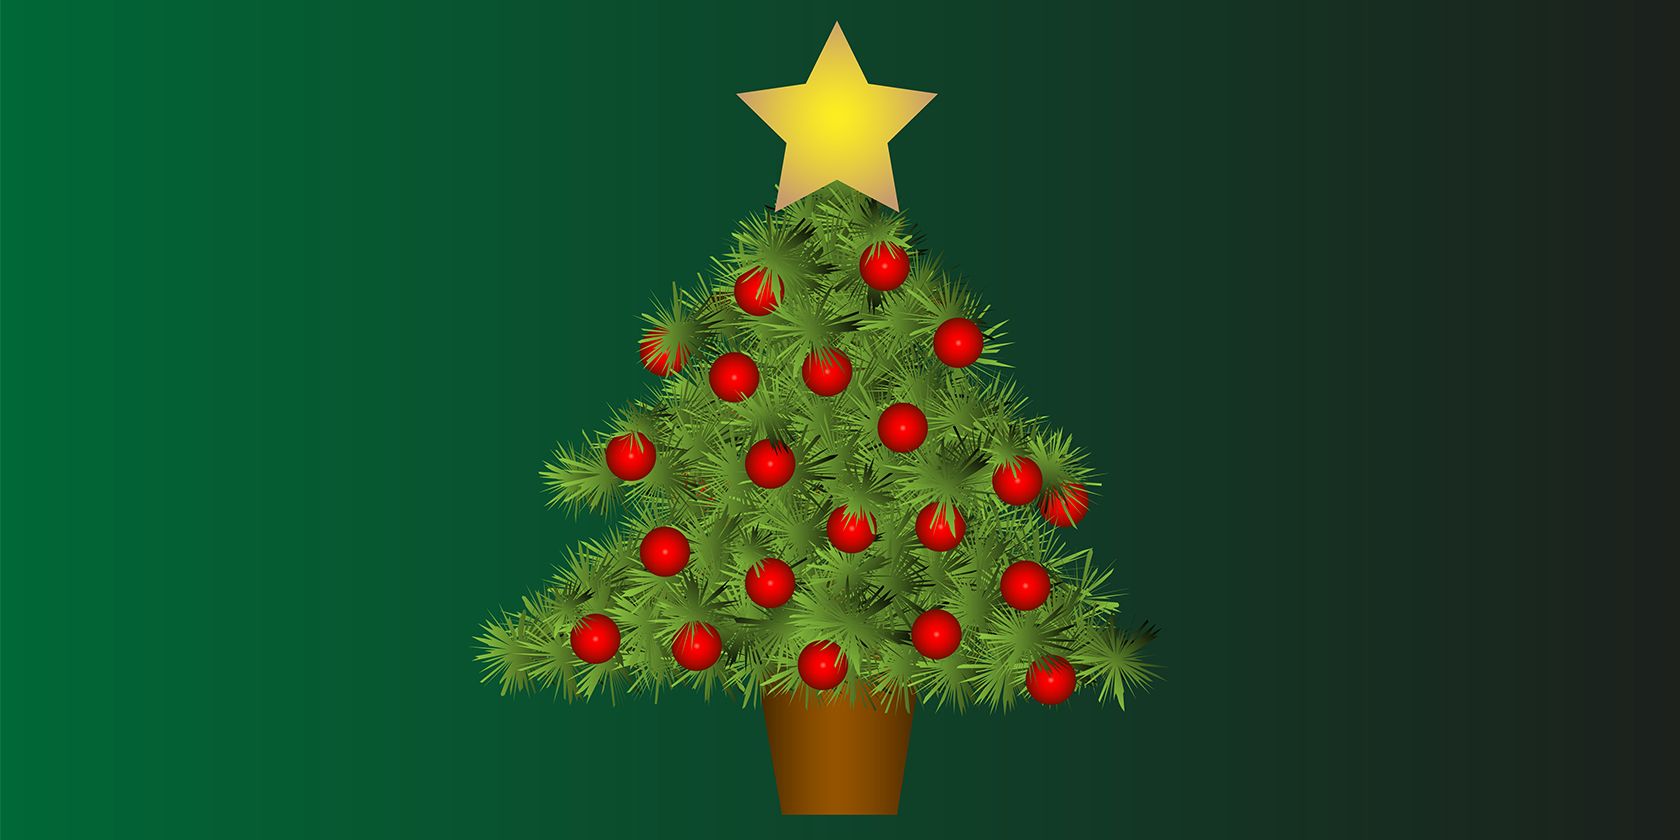 Illustrated Christmas tree on a green gradient background.